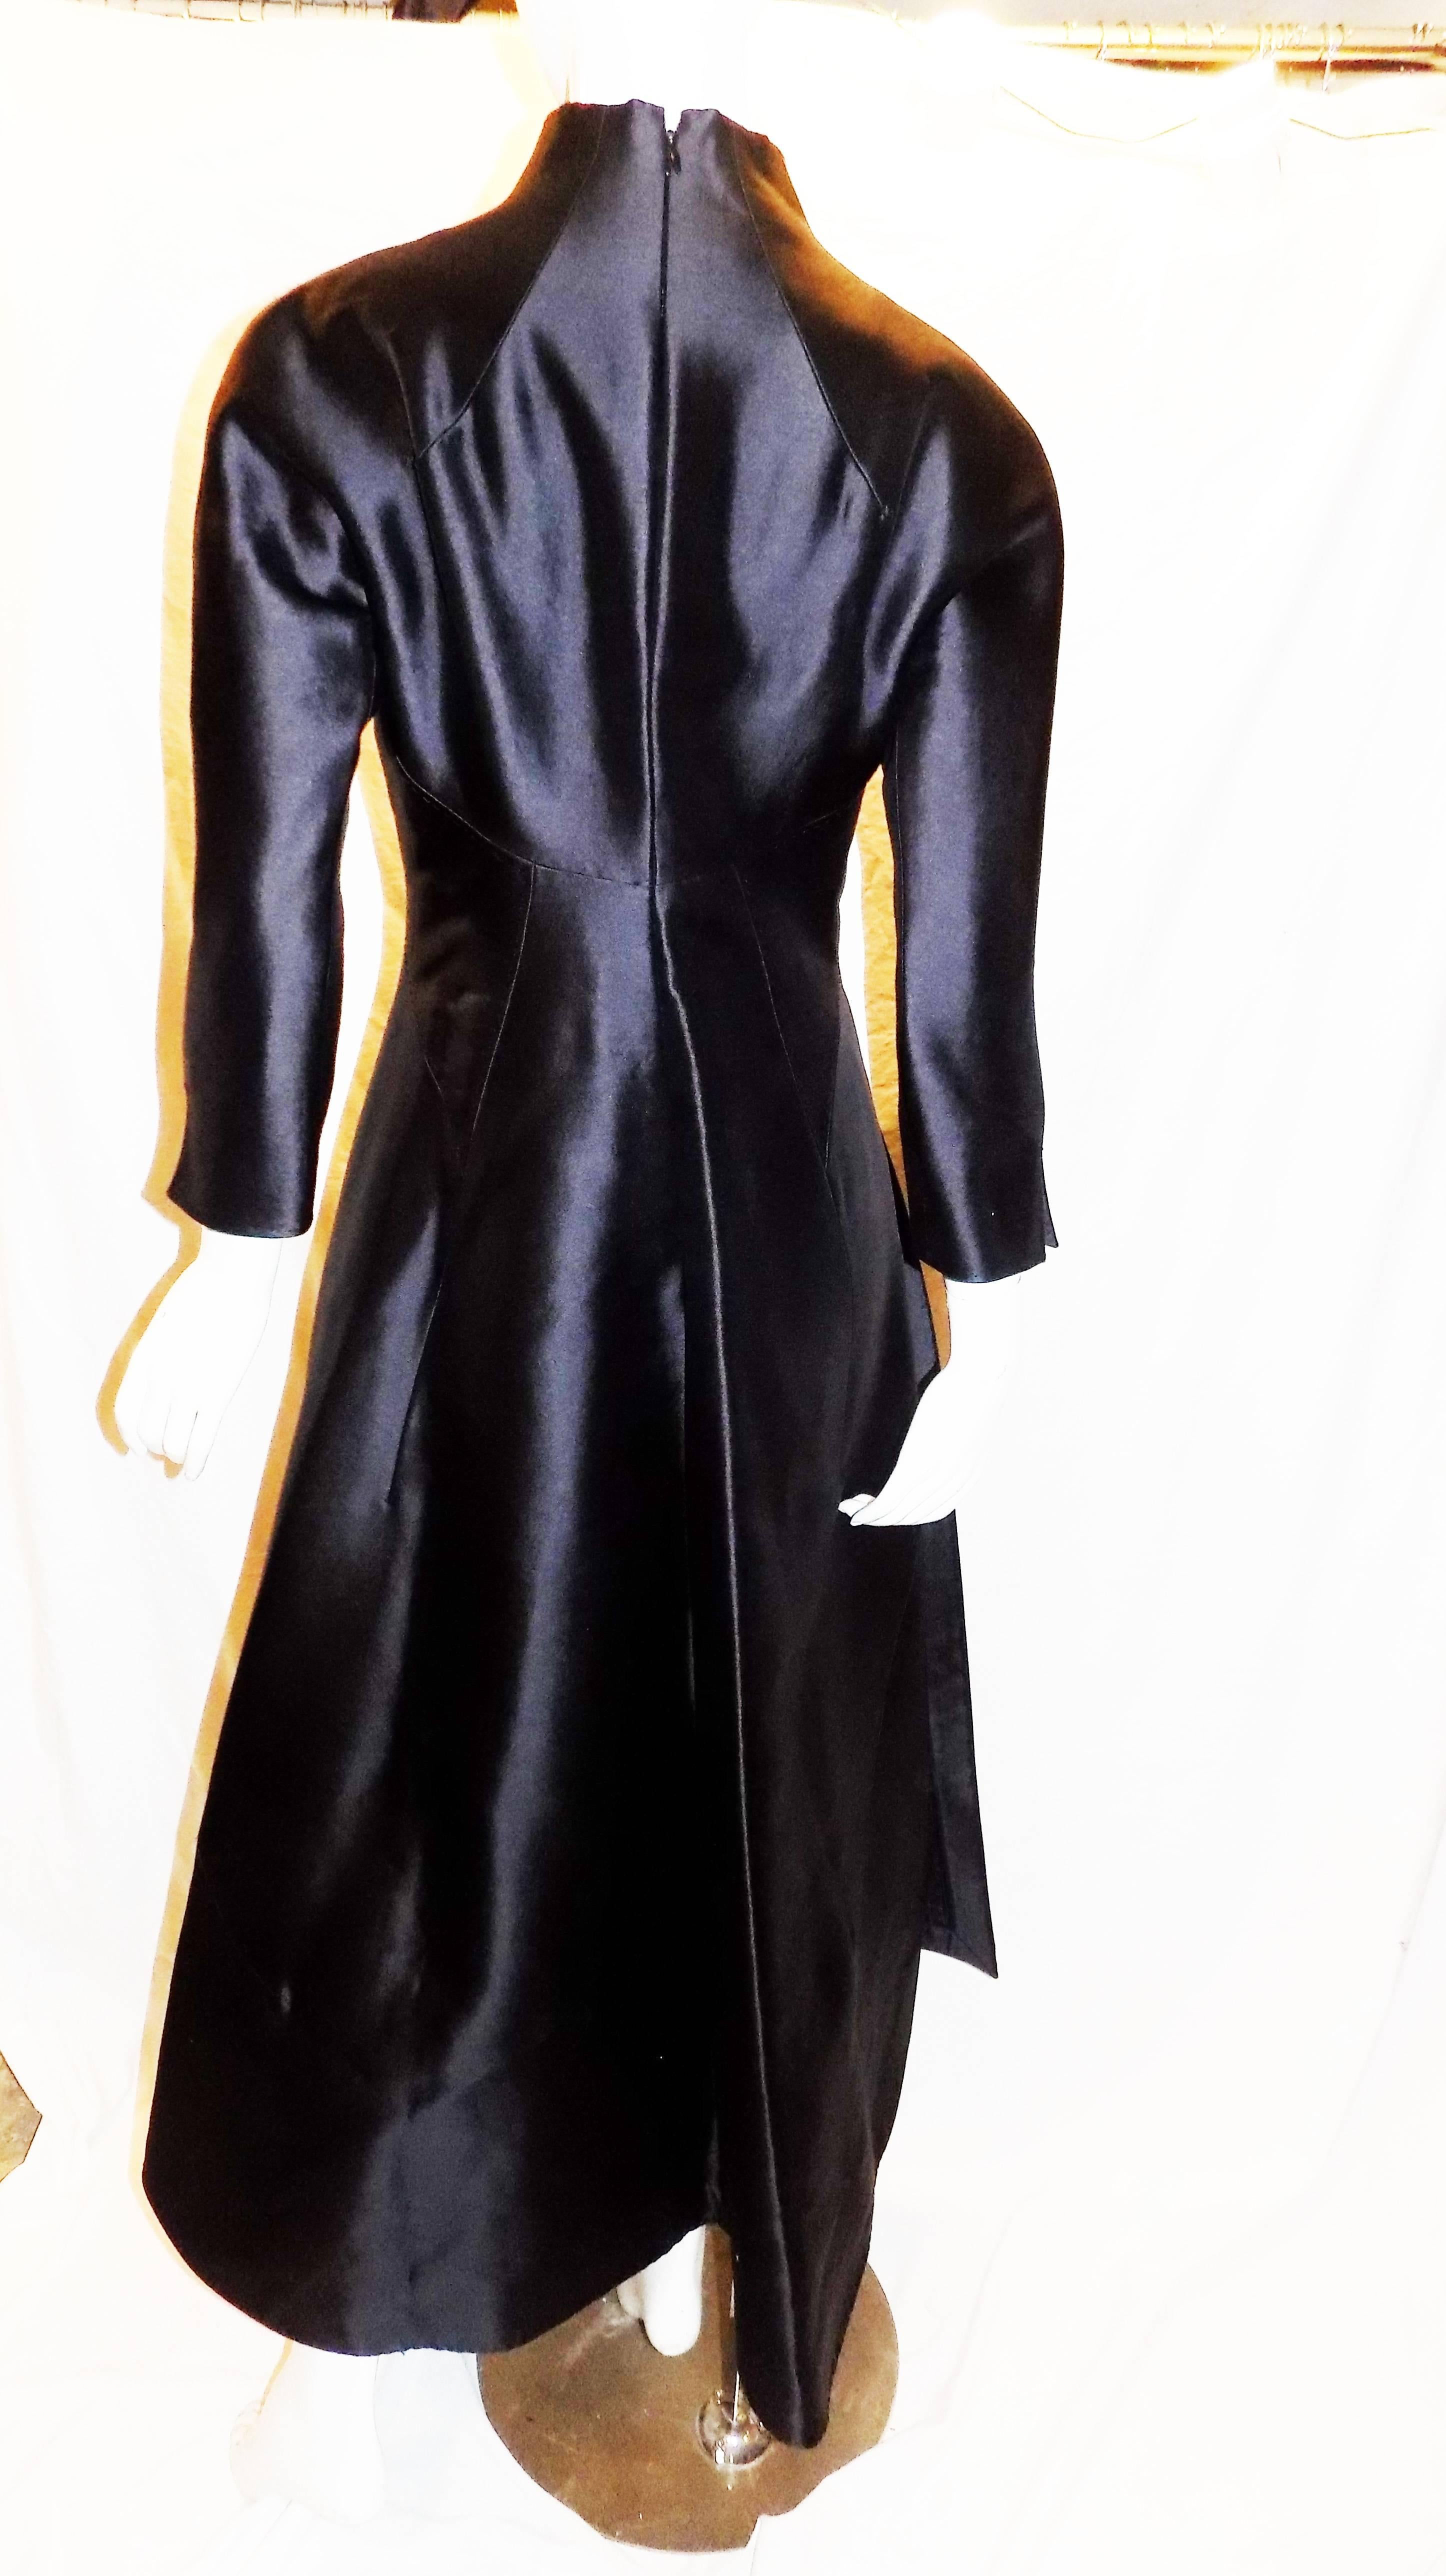 Beautifully structured black silk gown by Ralph Rucci. A line  High  low skirt part with fitted top and waist line.  Structured front loose  panel with hidden pocket under . Back zipper closure.  Never worn in Pristine condition!!  Size 10 but